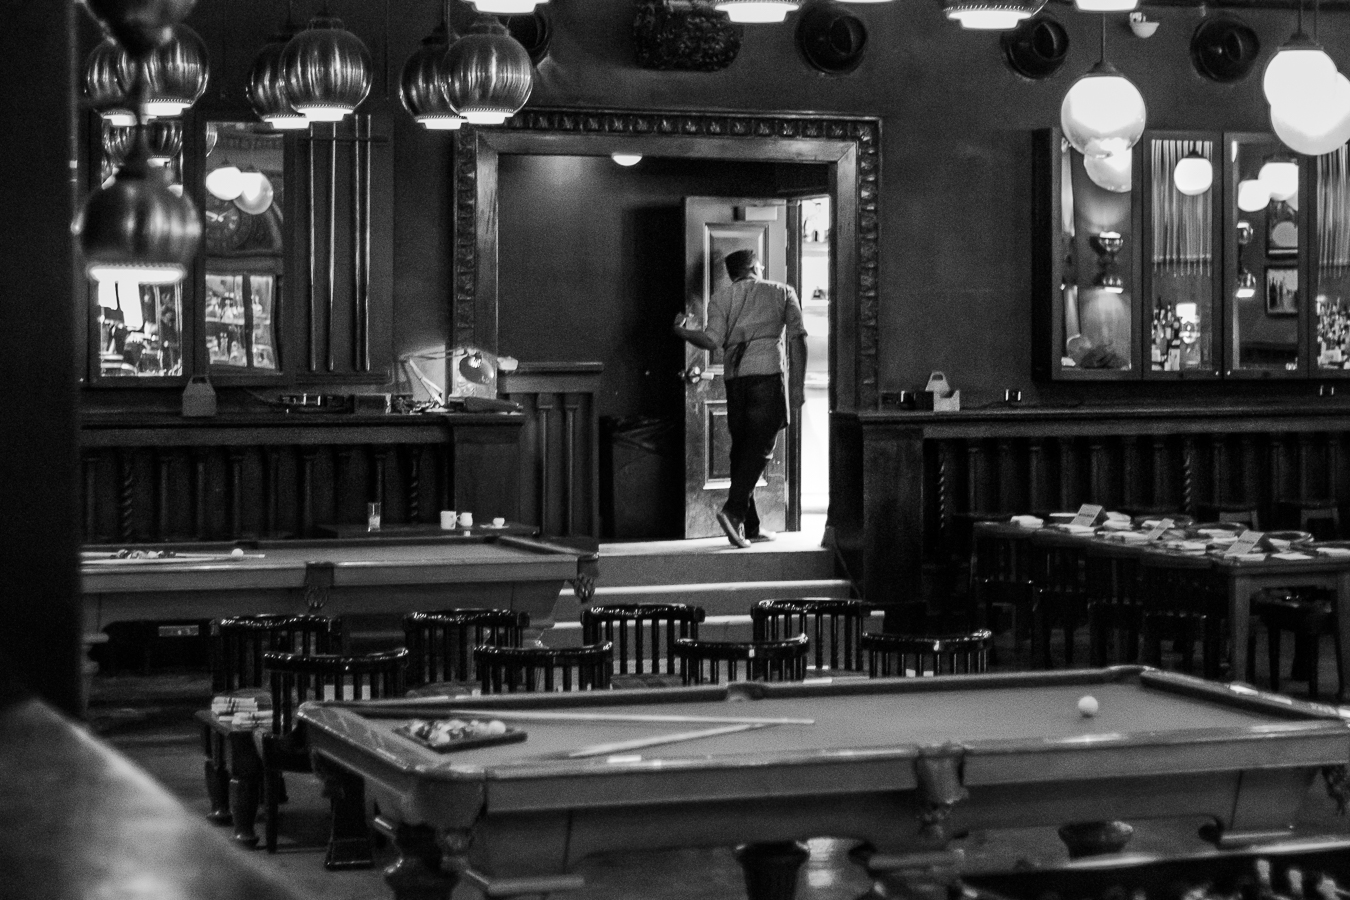 Chicago Athletic Association Game Room